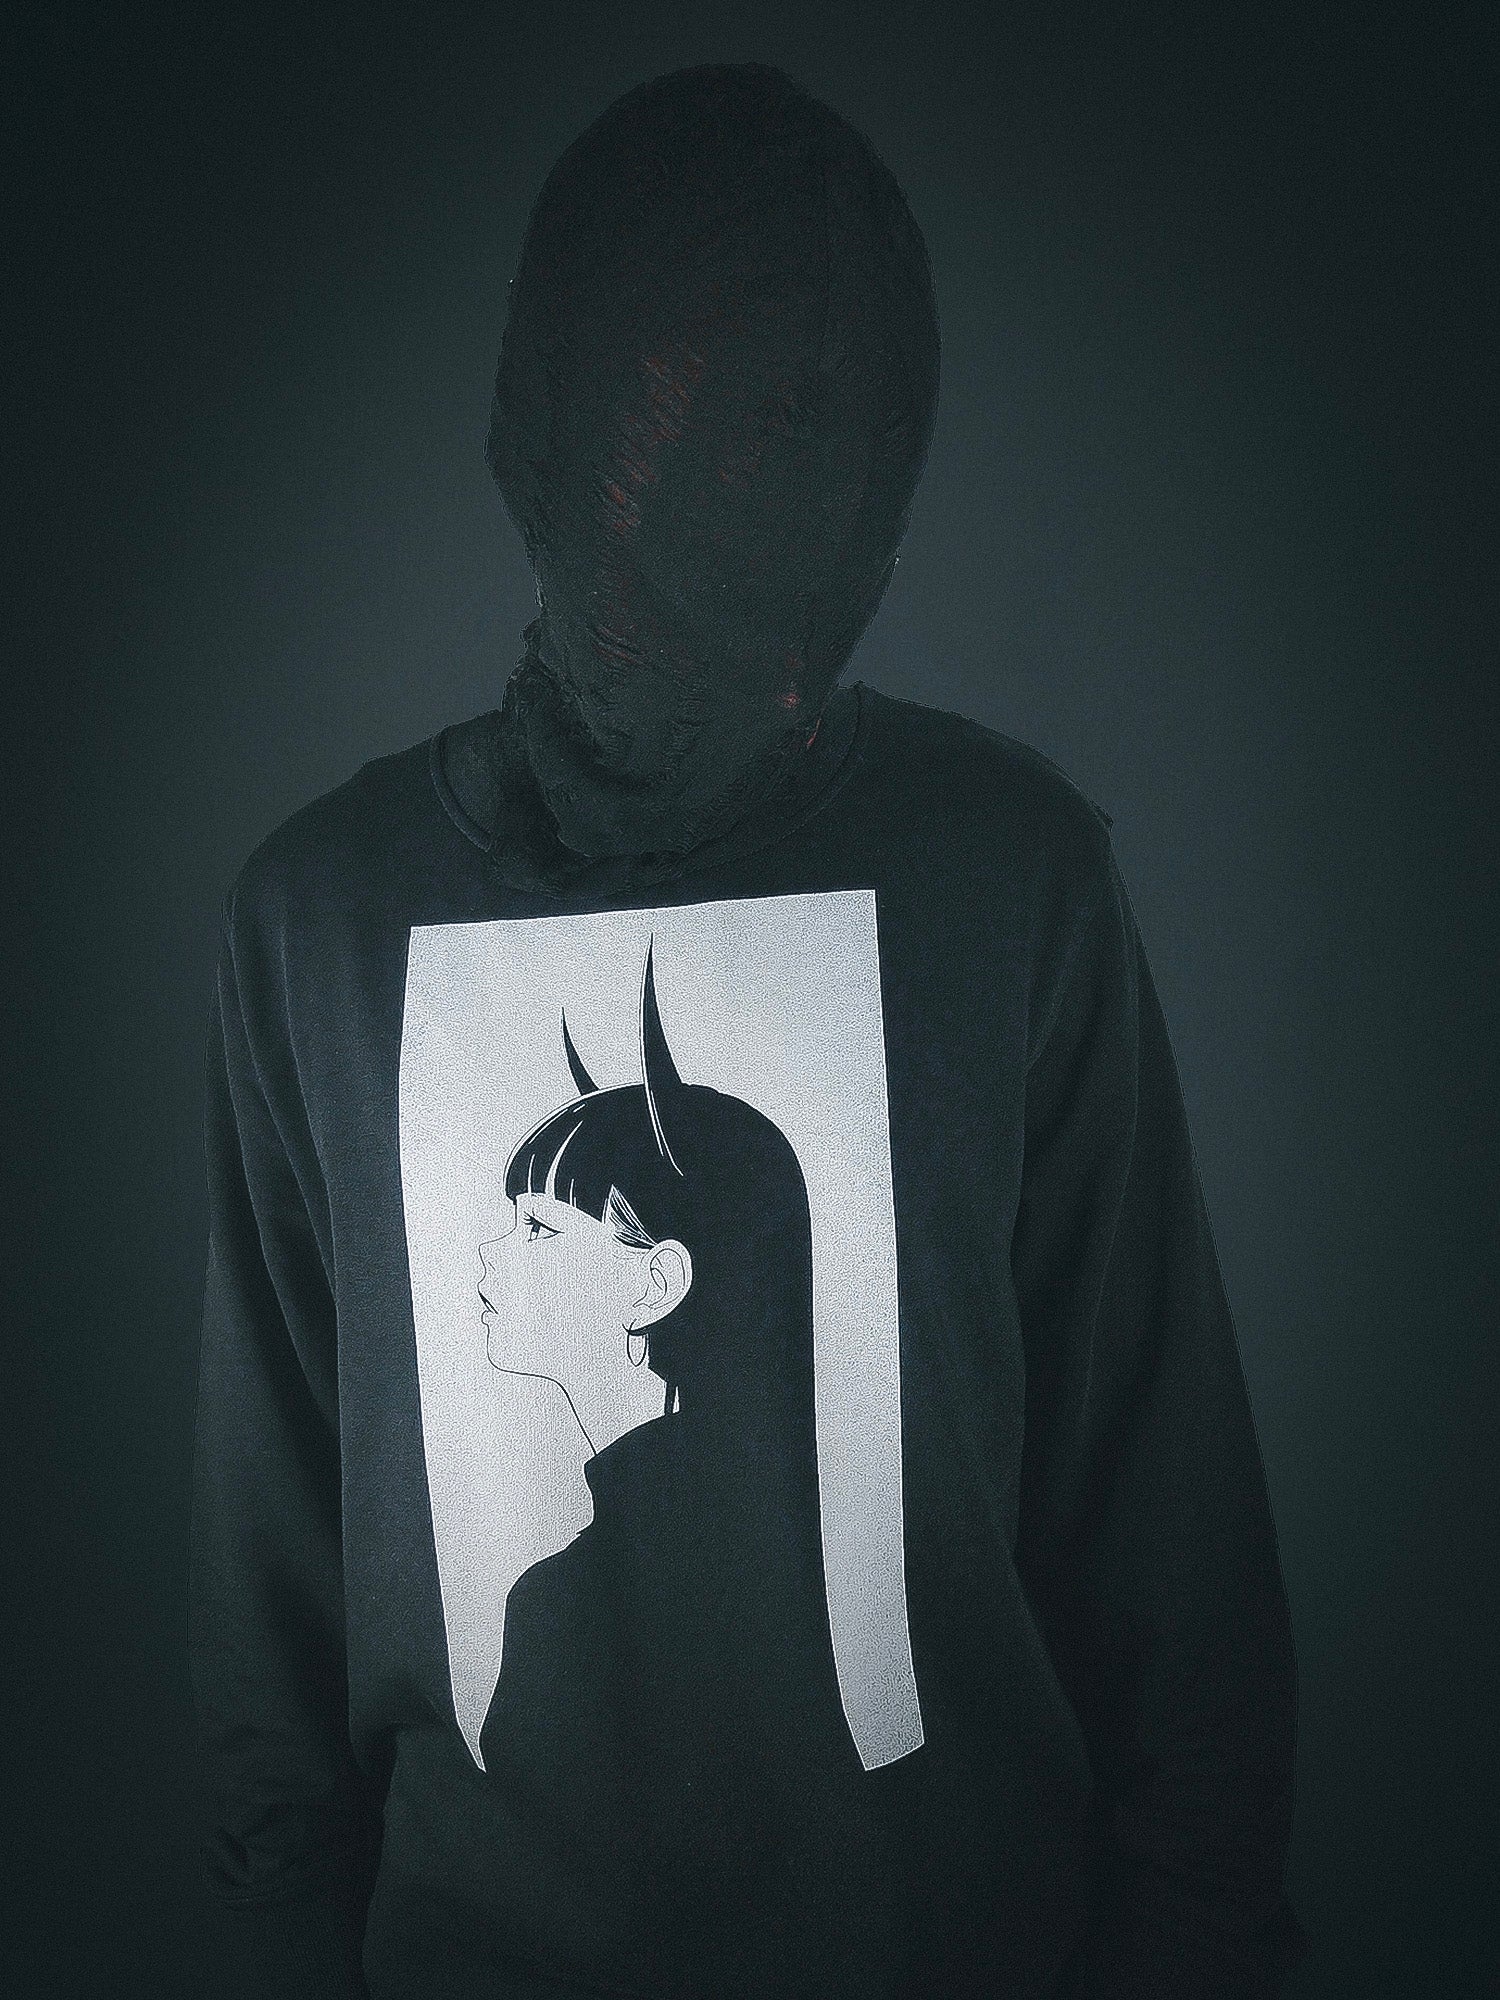 Person wearing a black sweatshirt featuring a minimalist anime design of a girl with long hair and horns, with their head wrapped in black fabric, standing against a dark background.